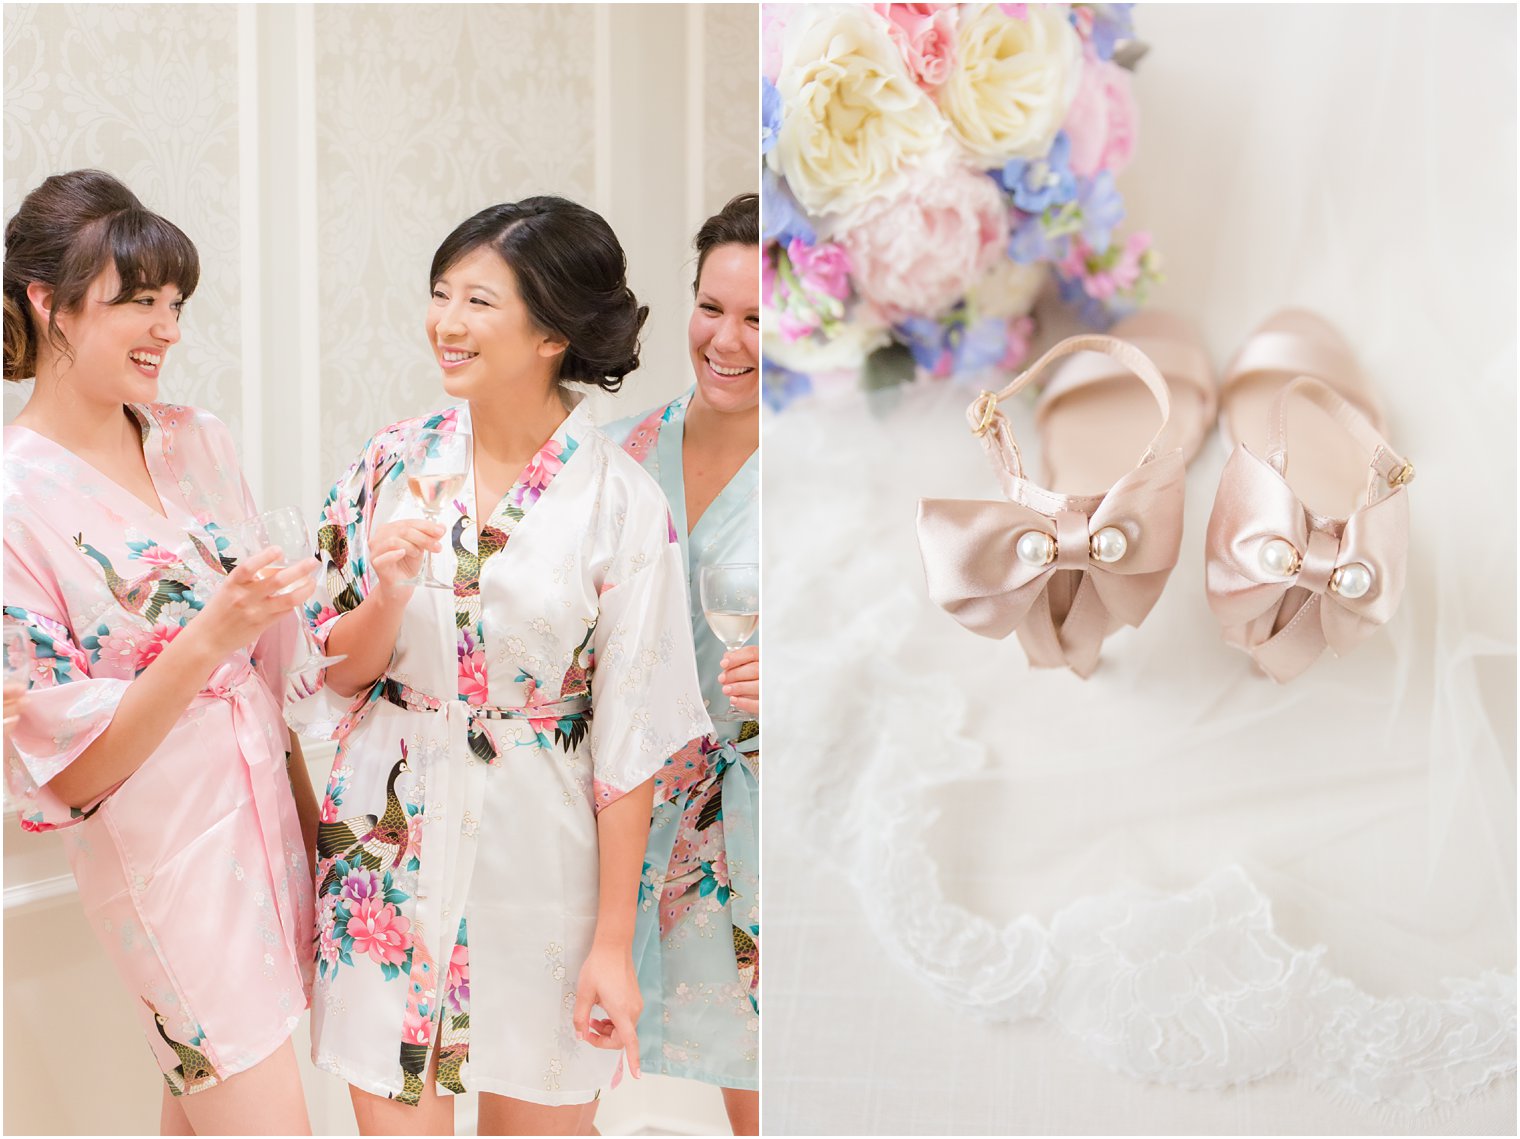 Bride laughing with bridesmaid with blush shoe detail photographed by Idalia Photography associate photographer Jocelyn